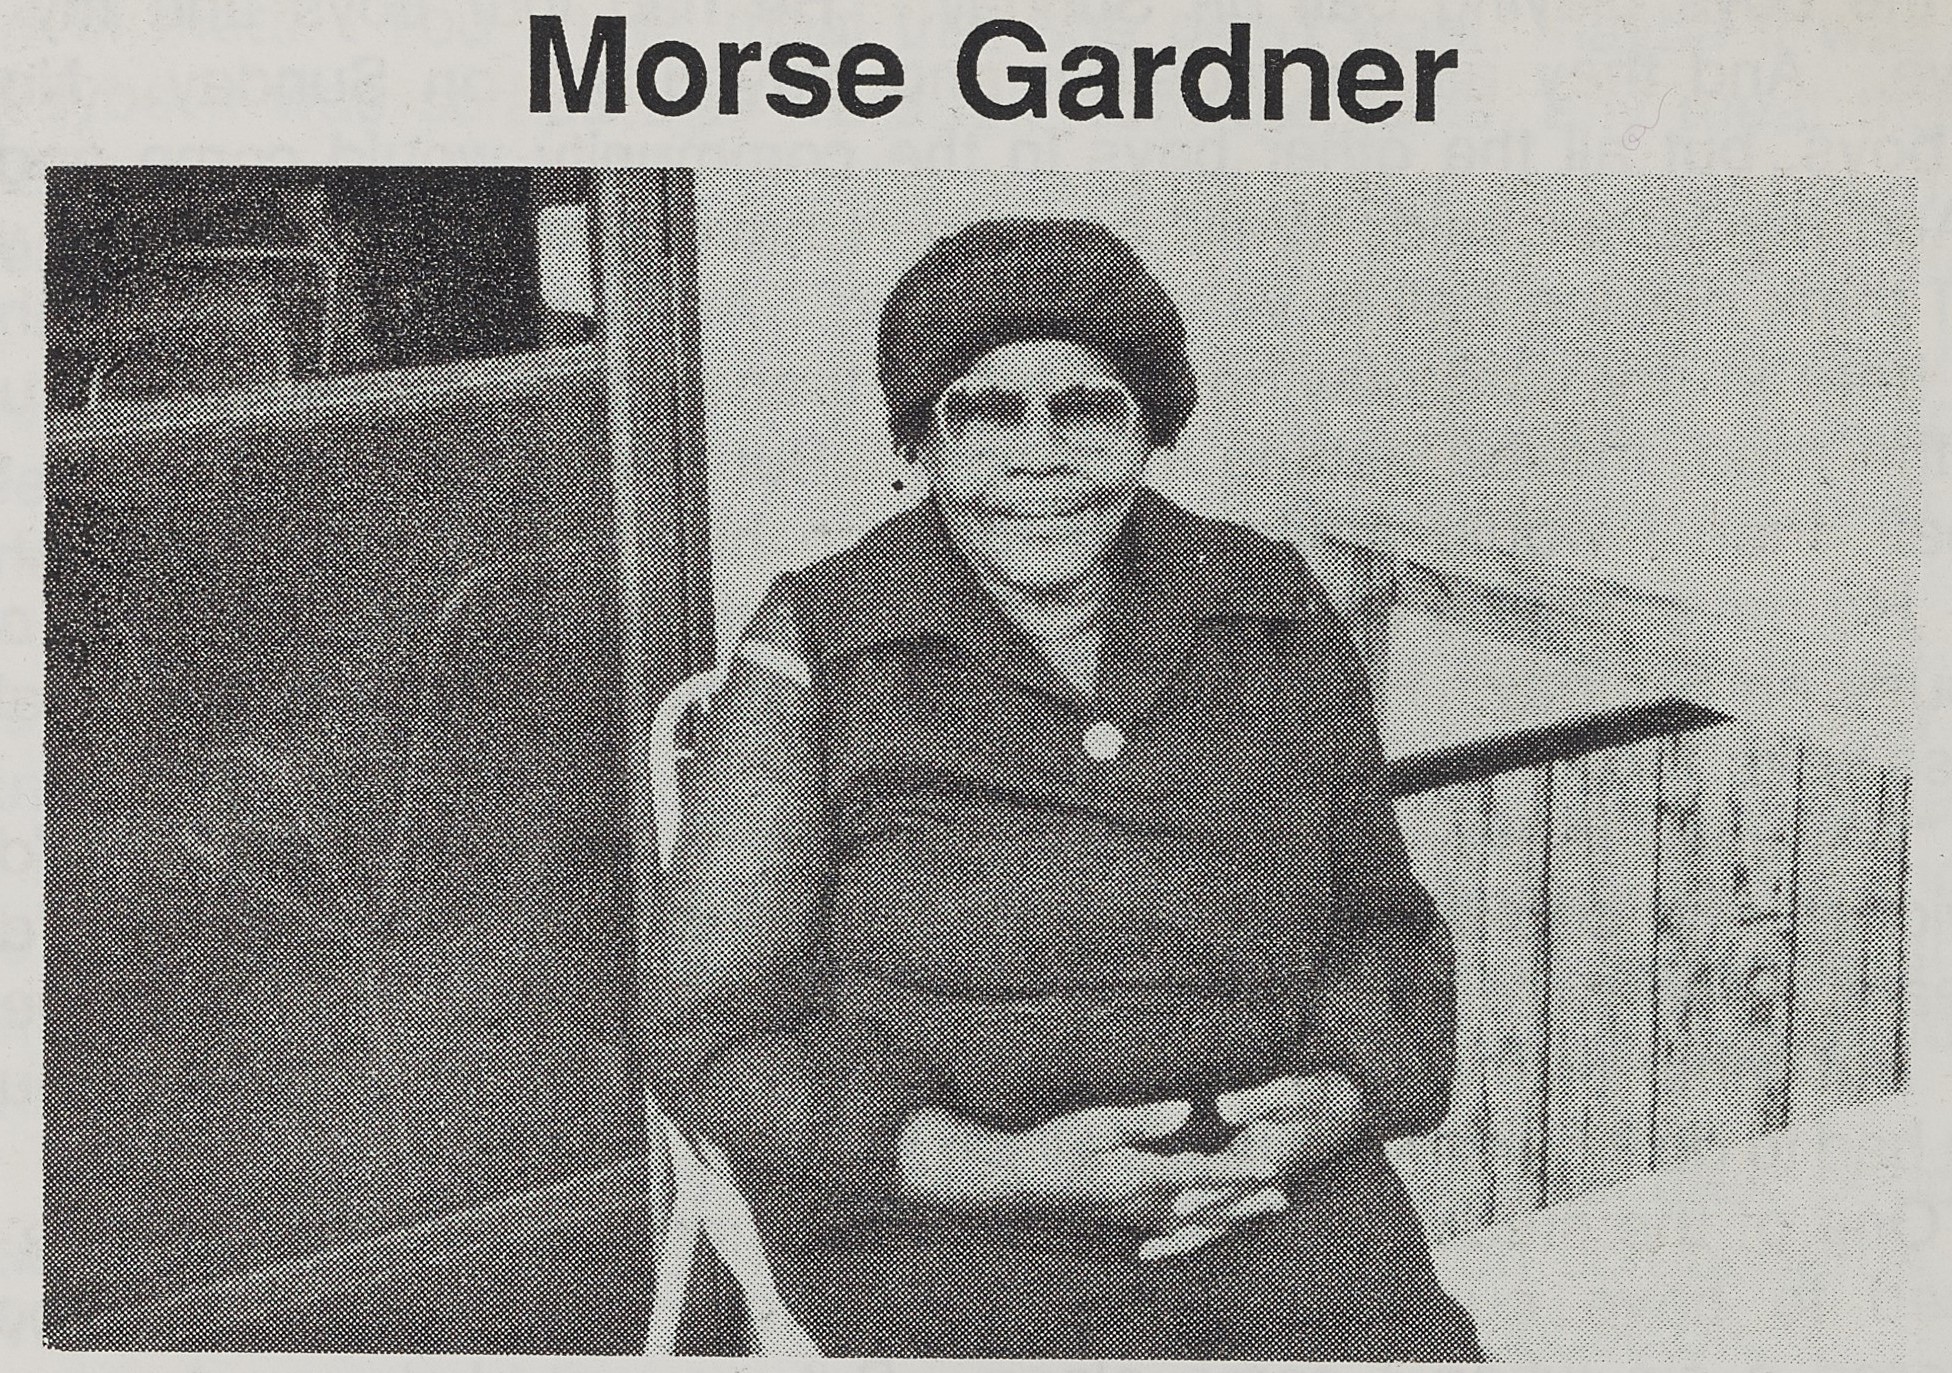 An older Black woman sits on the porch of her home.